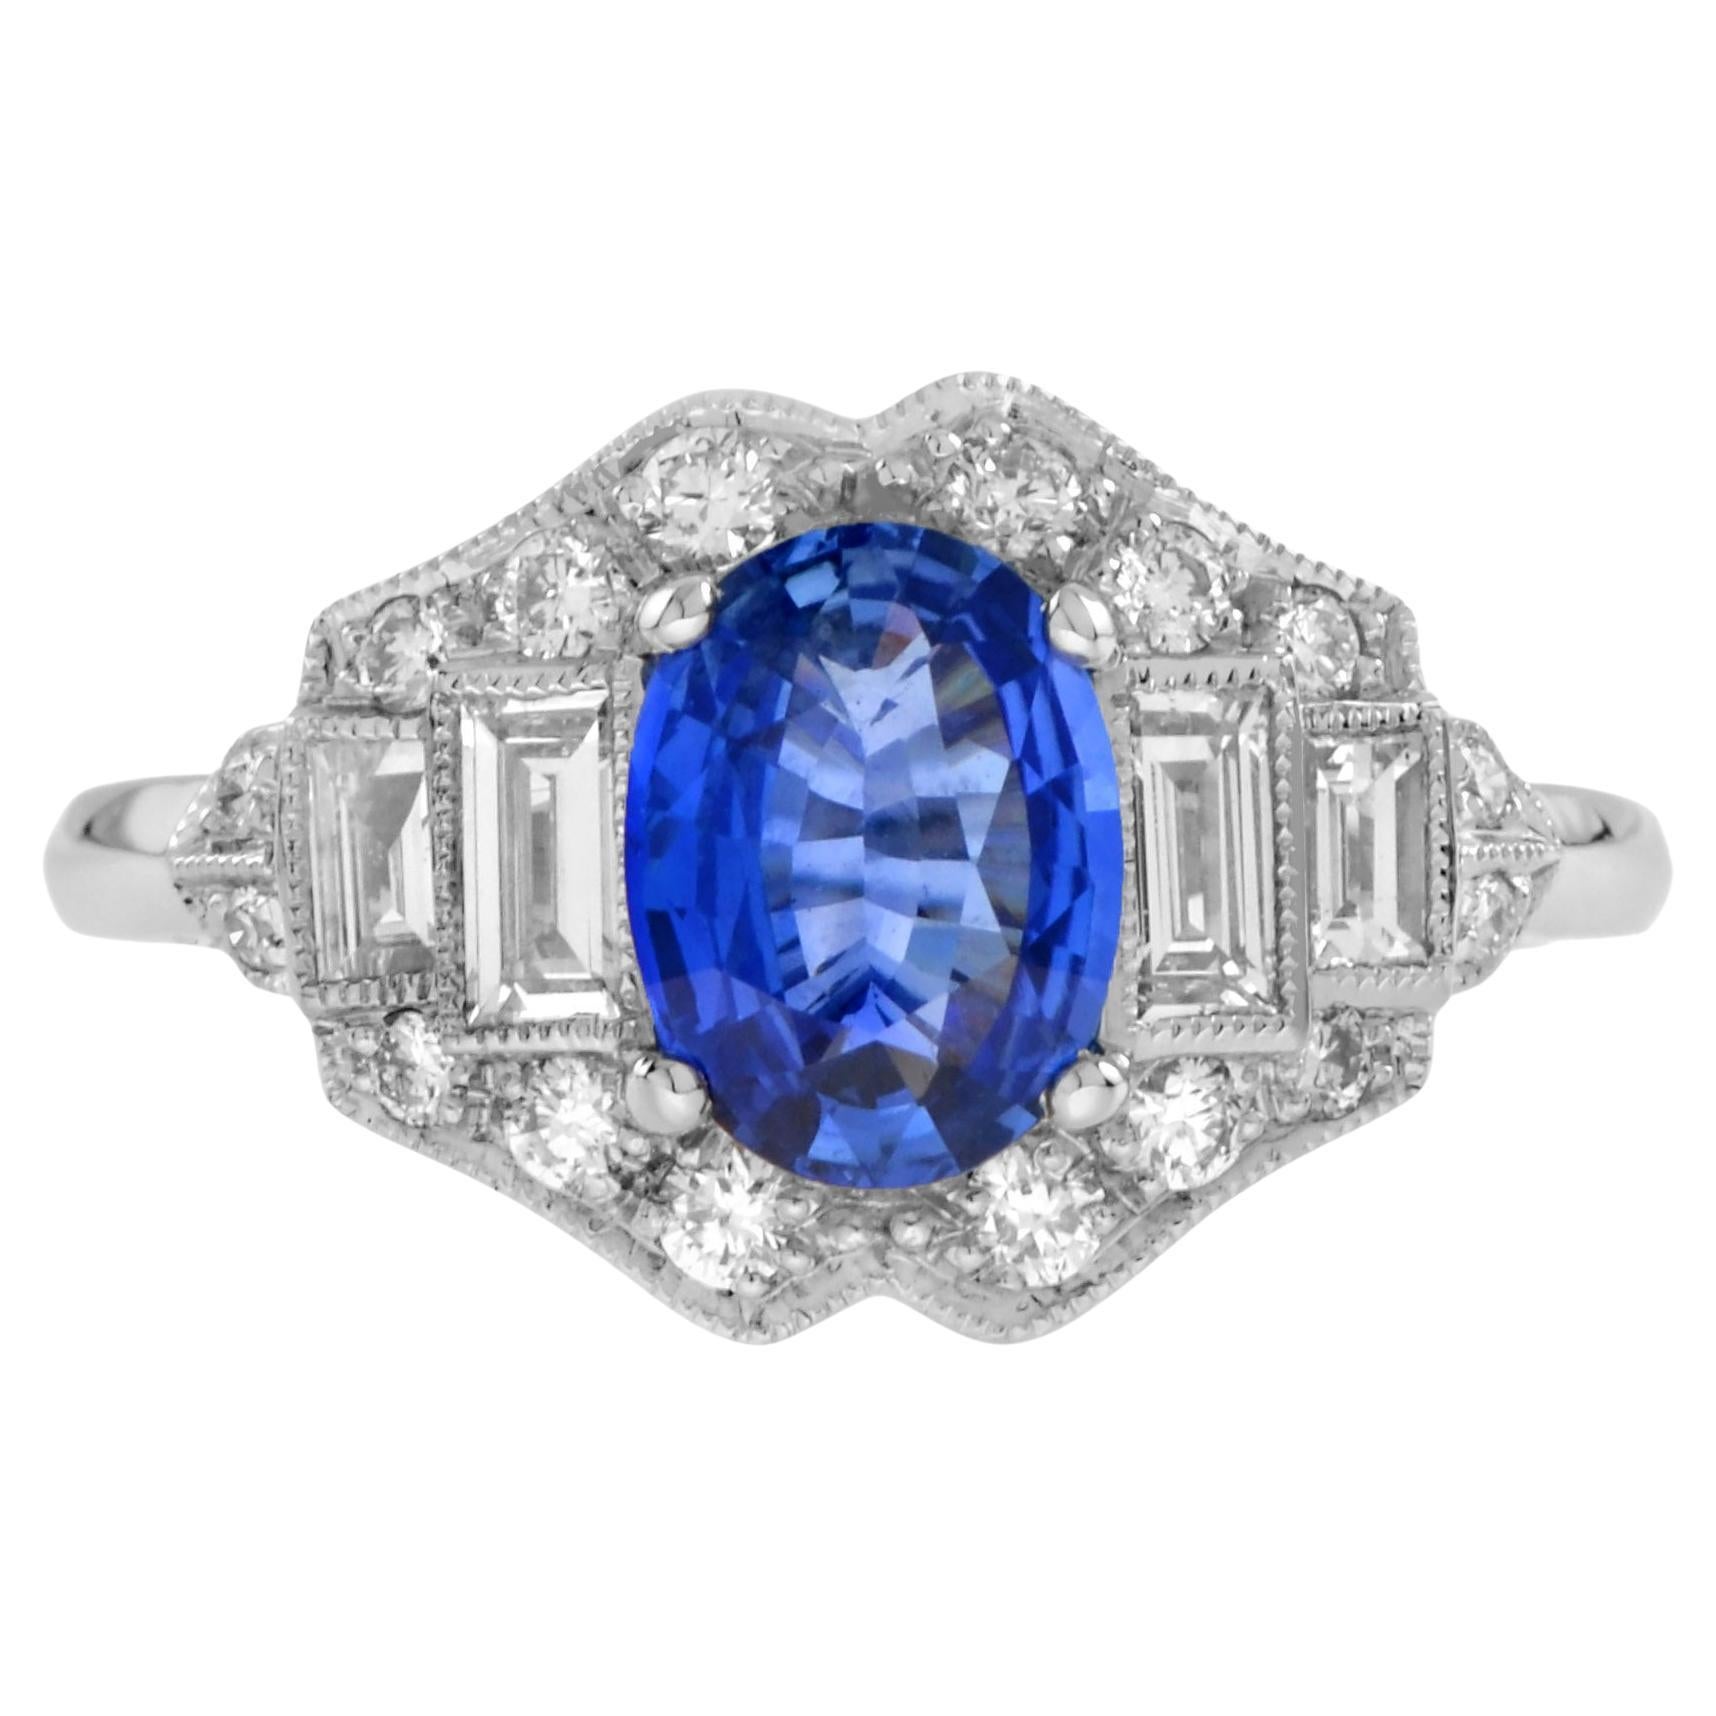 Ceylon Sapphire and Diamond Art Deco Style Engagement Ring in 18k White Gold